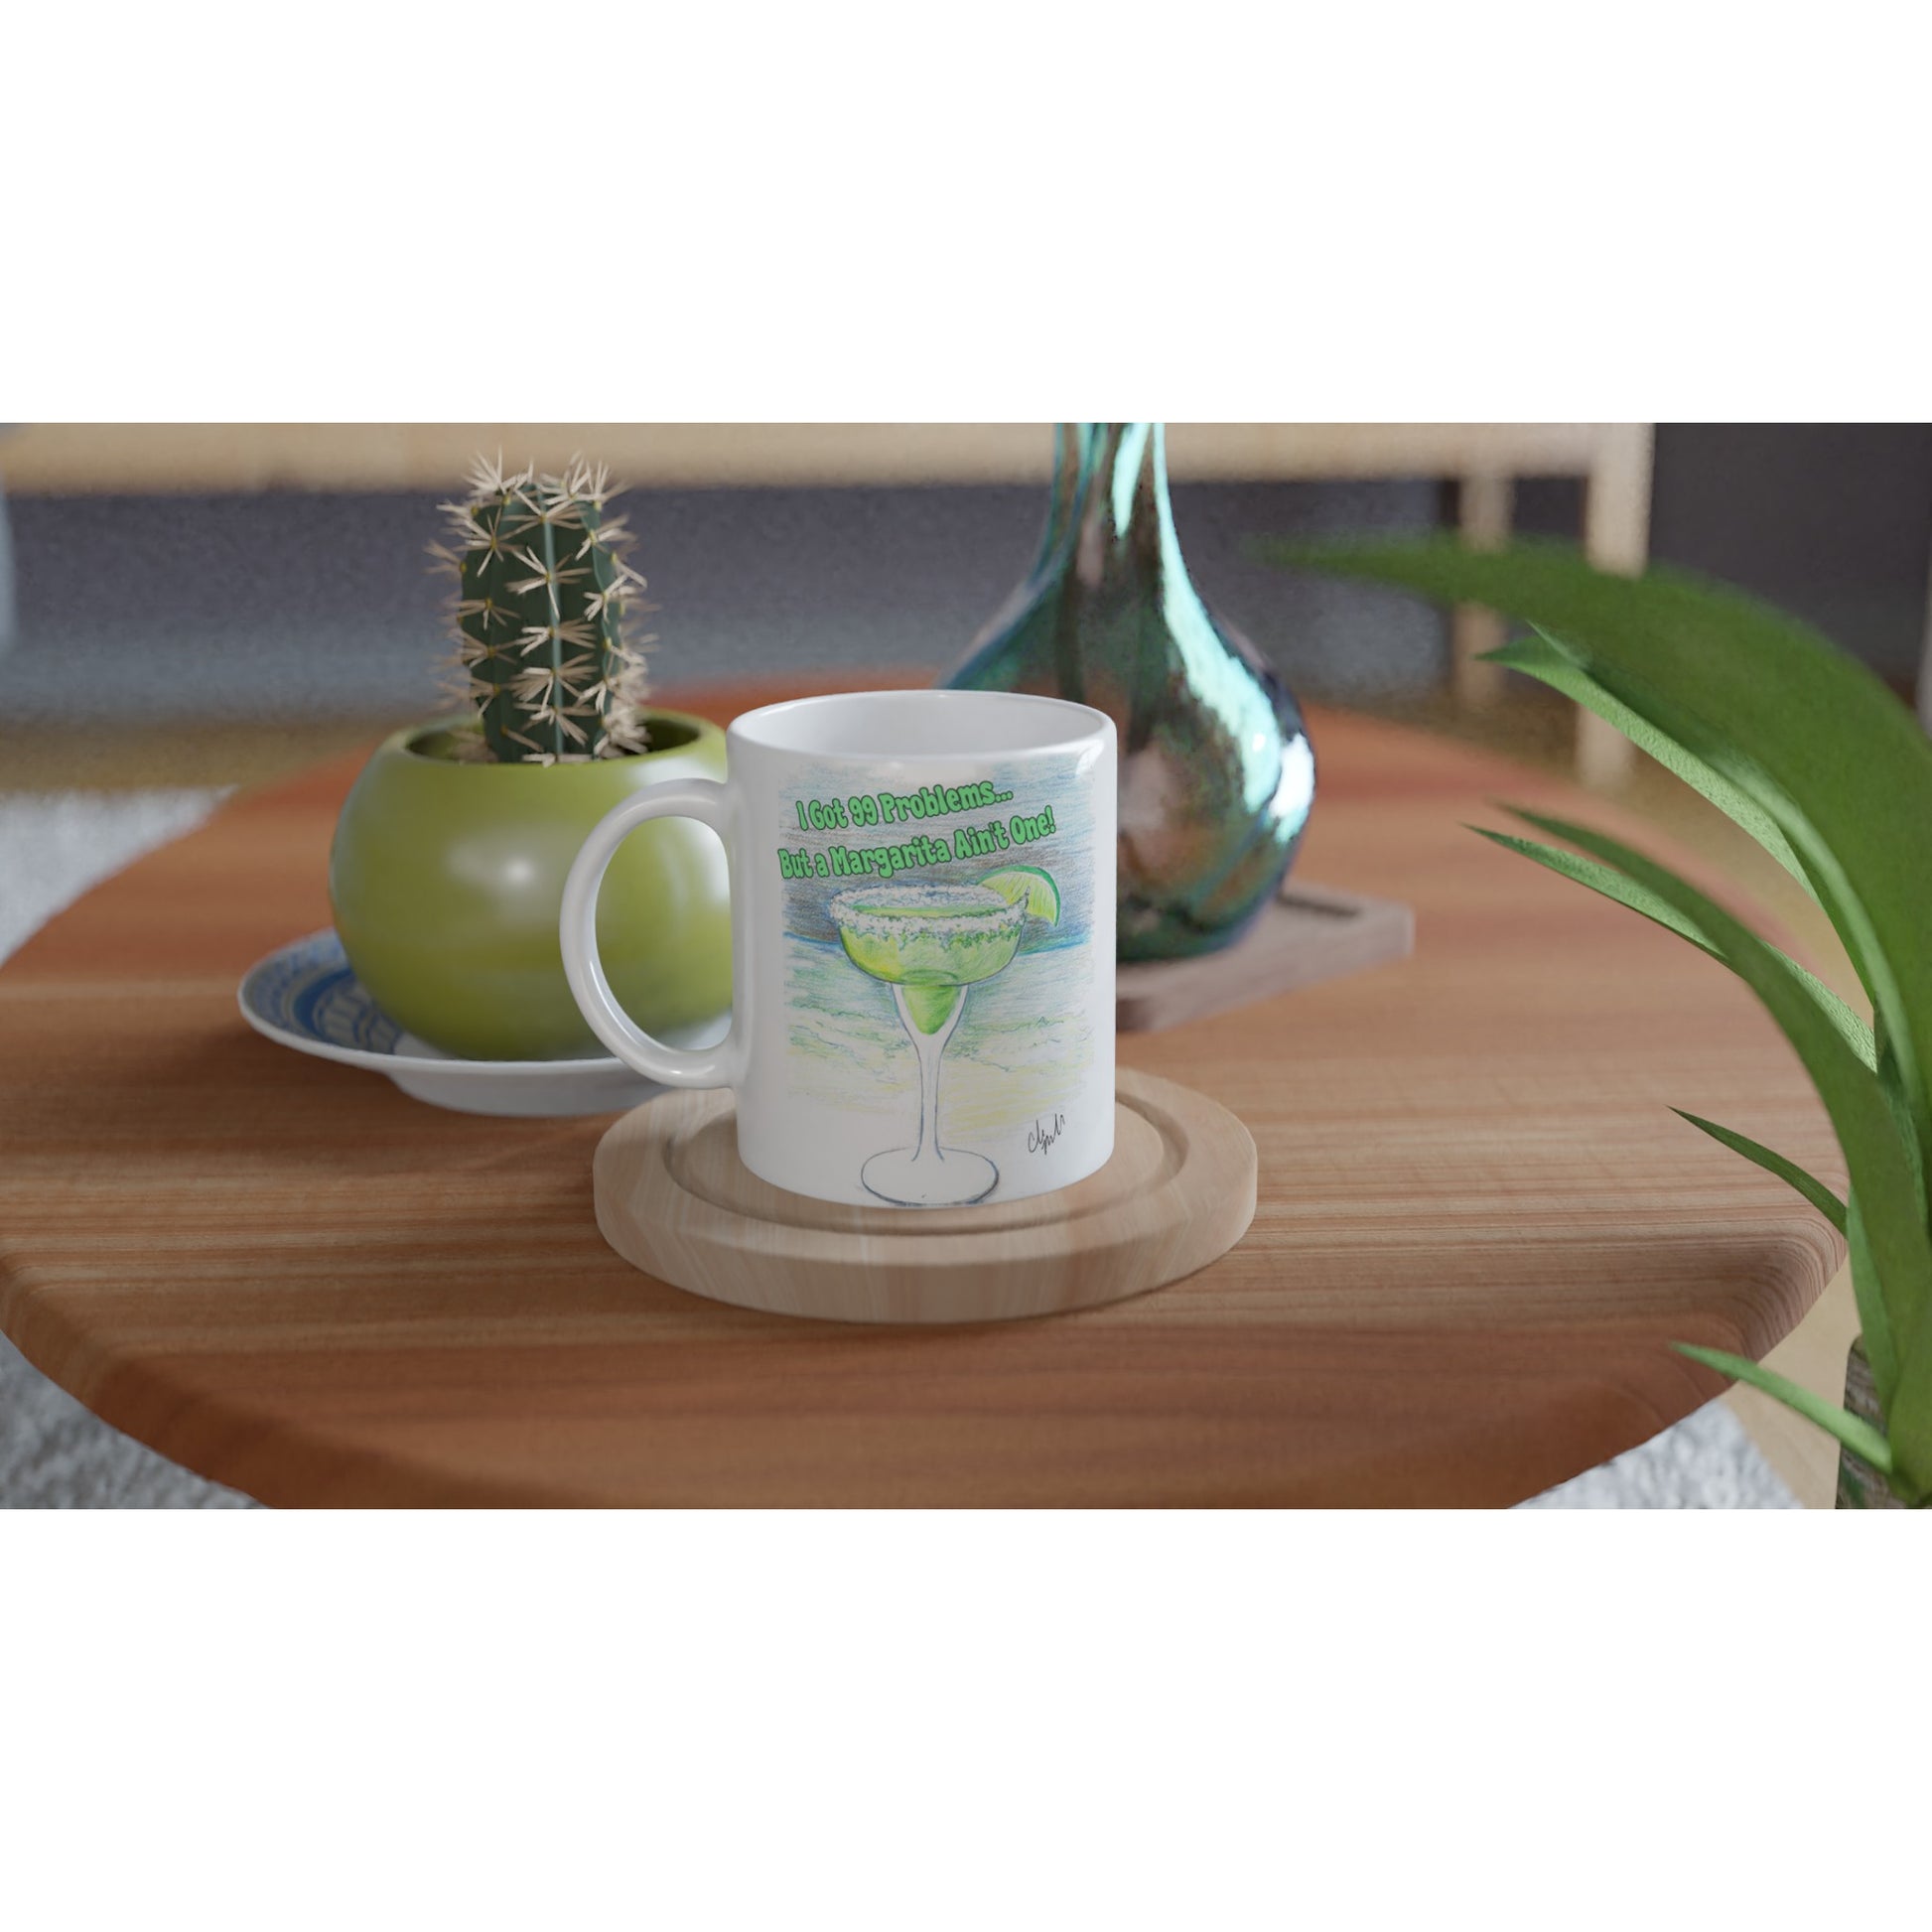 A white ceramic 11oz mug with motto I Got 99 Problems But a Margarita Aint One and WhatYa Say logo on back dishwasher and microwave safe from WhatYa Say Apparel sitting on coaster on coffee table with green potted cactus and silver vase.